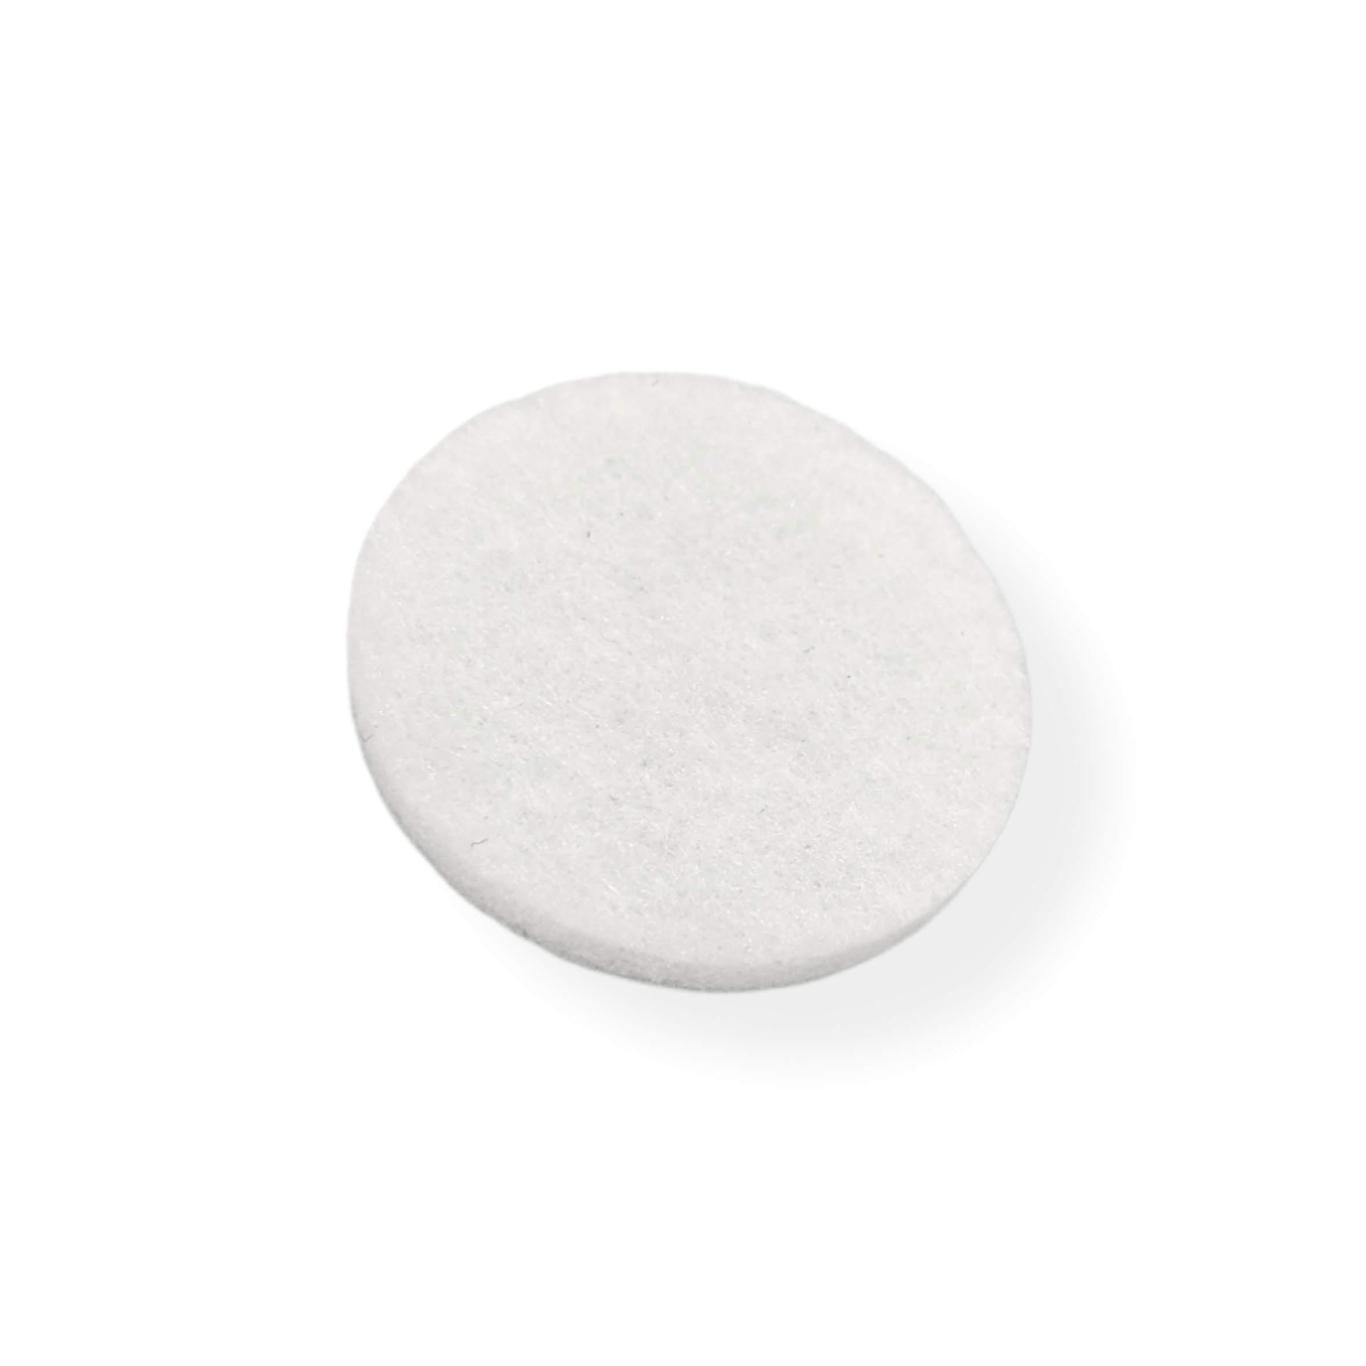 Felt Pads - White Self Adhesive Stick on Felt - Round 40mm Diameter - Made in Germany - Keay Vital Parts